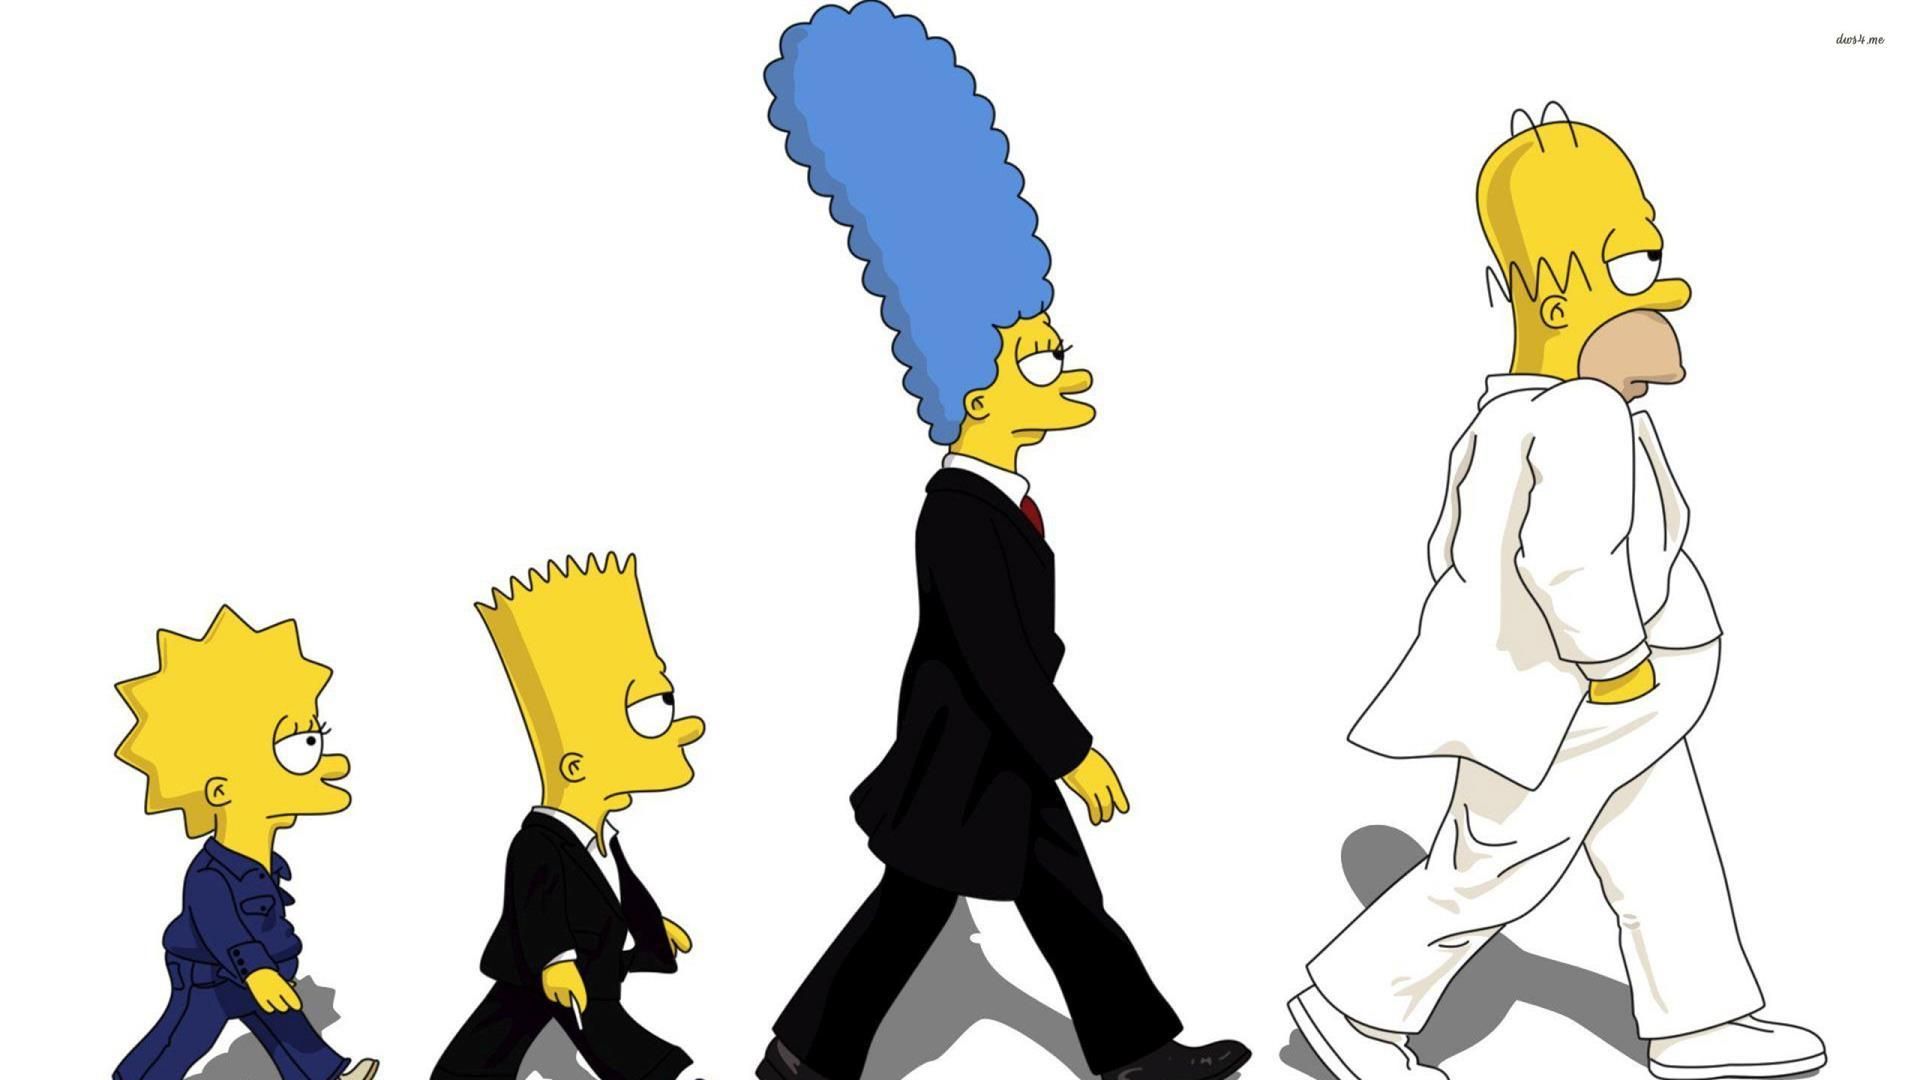 Get awesome The Simpsons HD image in each new Chrome tab!. The simpsons, Simpsons drawings, Bart simpson drawing